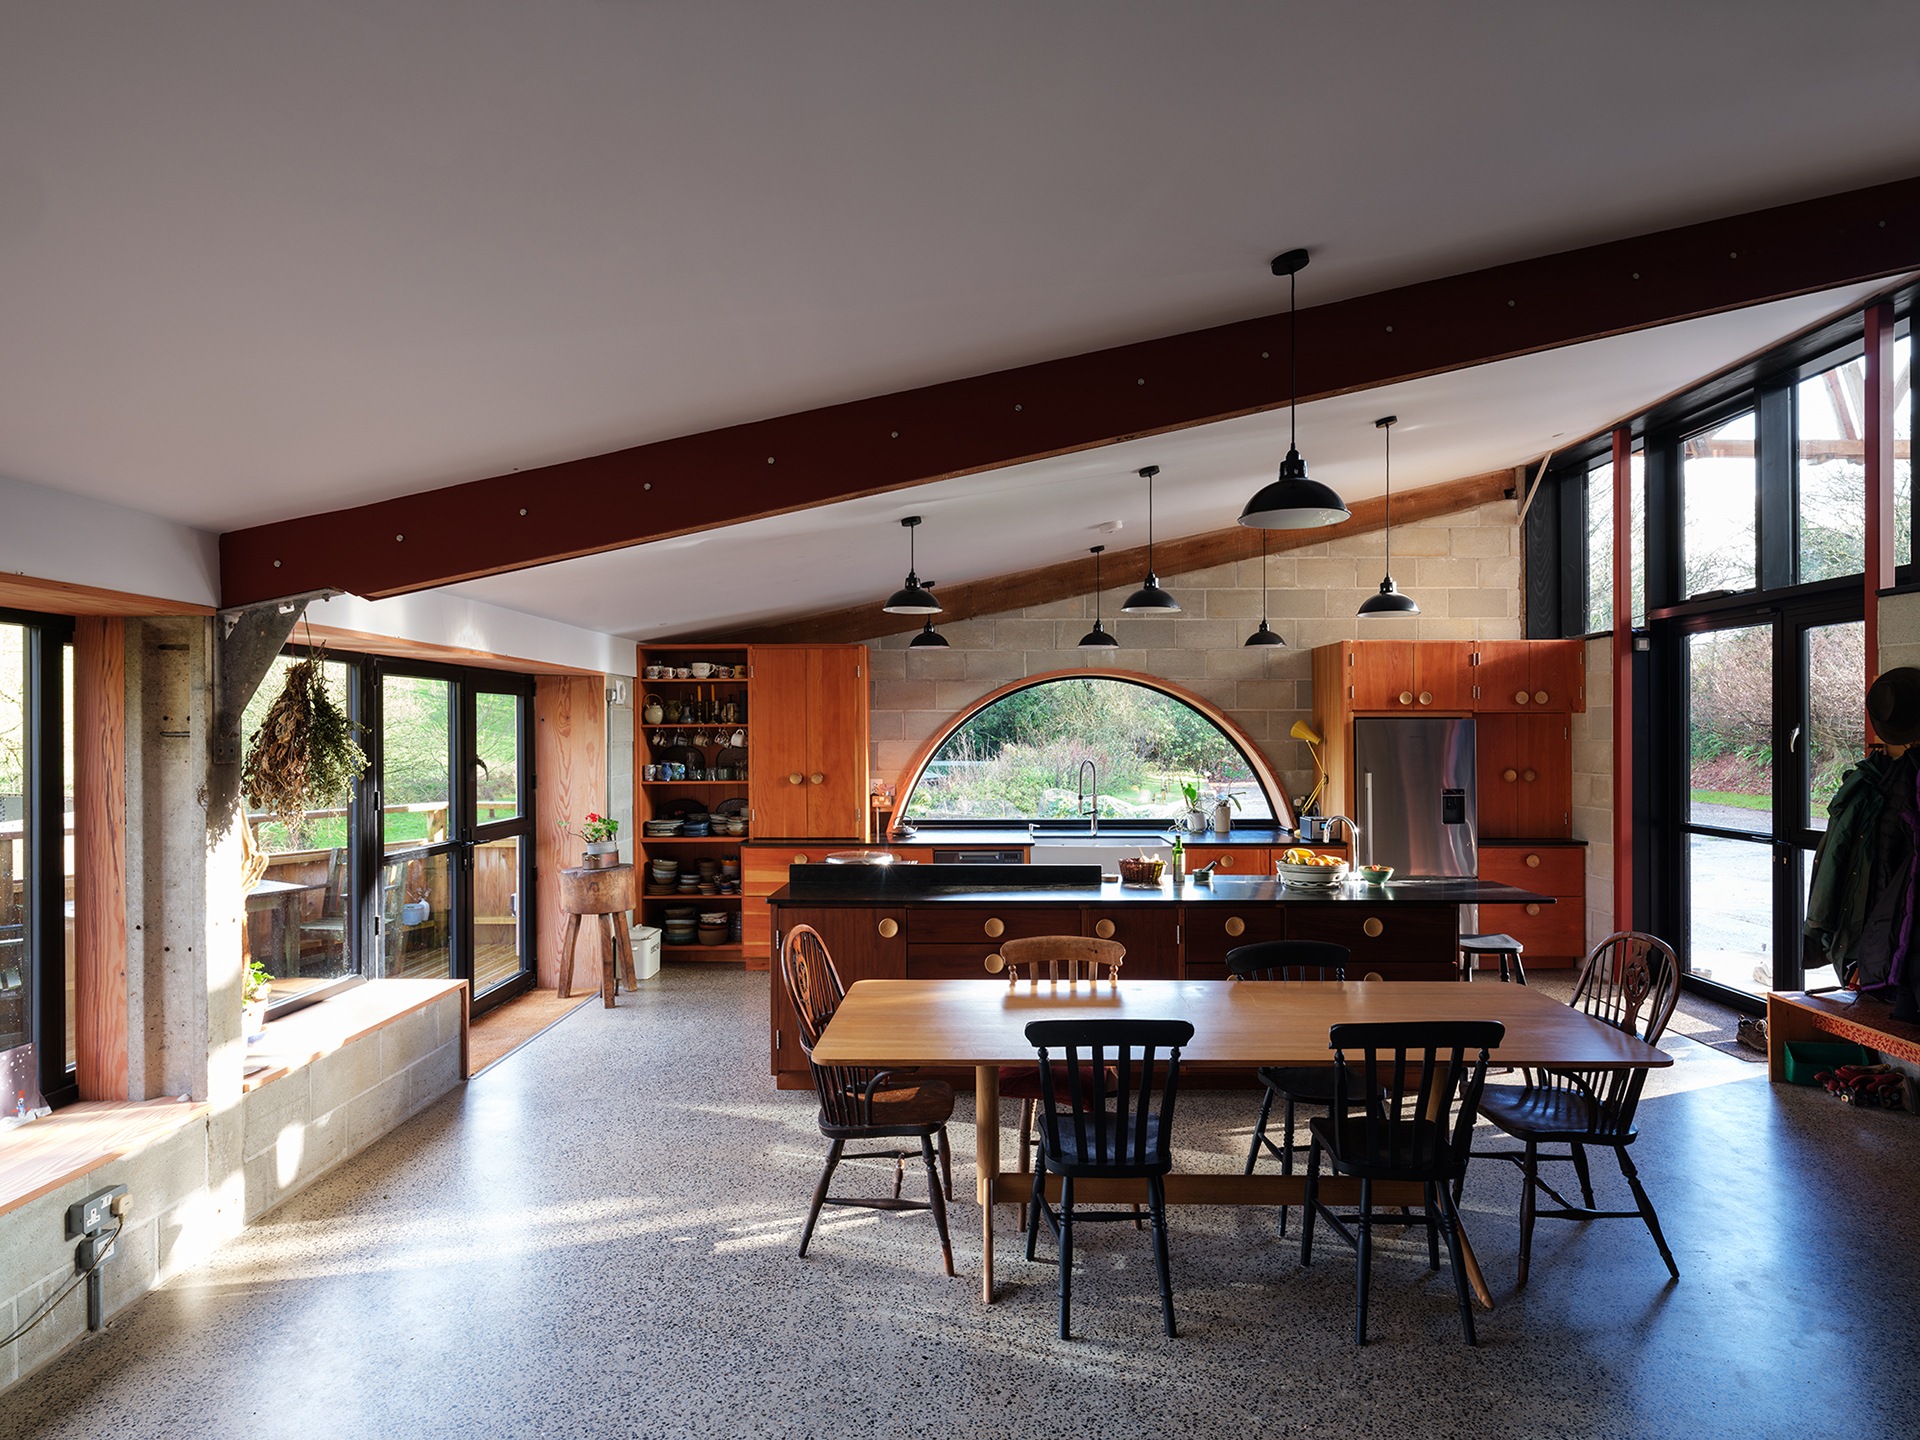 Kitchen in Cowshed - House of the Year shortlisted home 2023